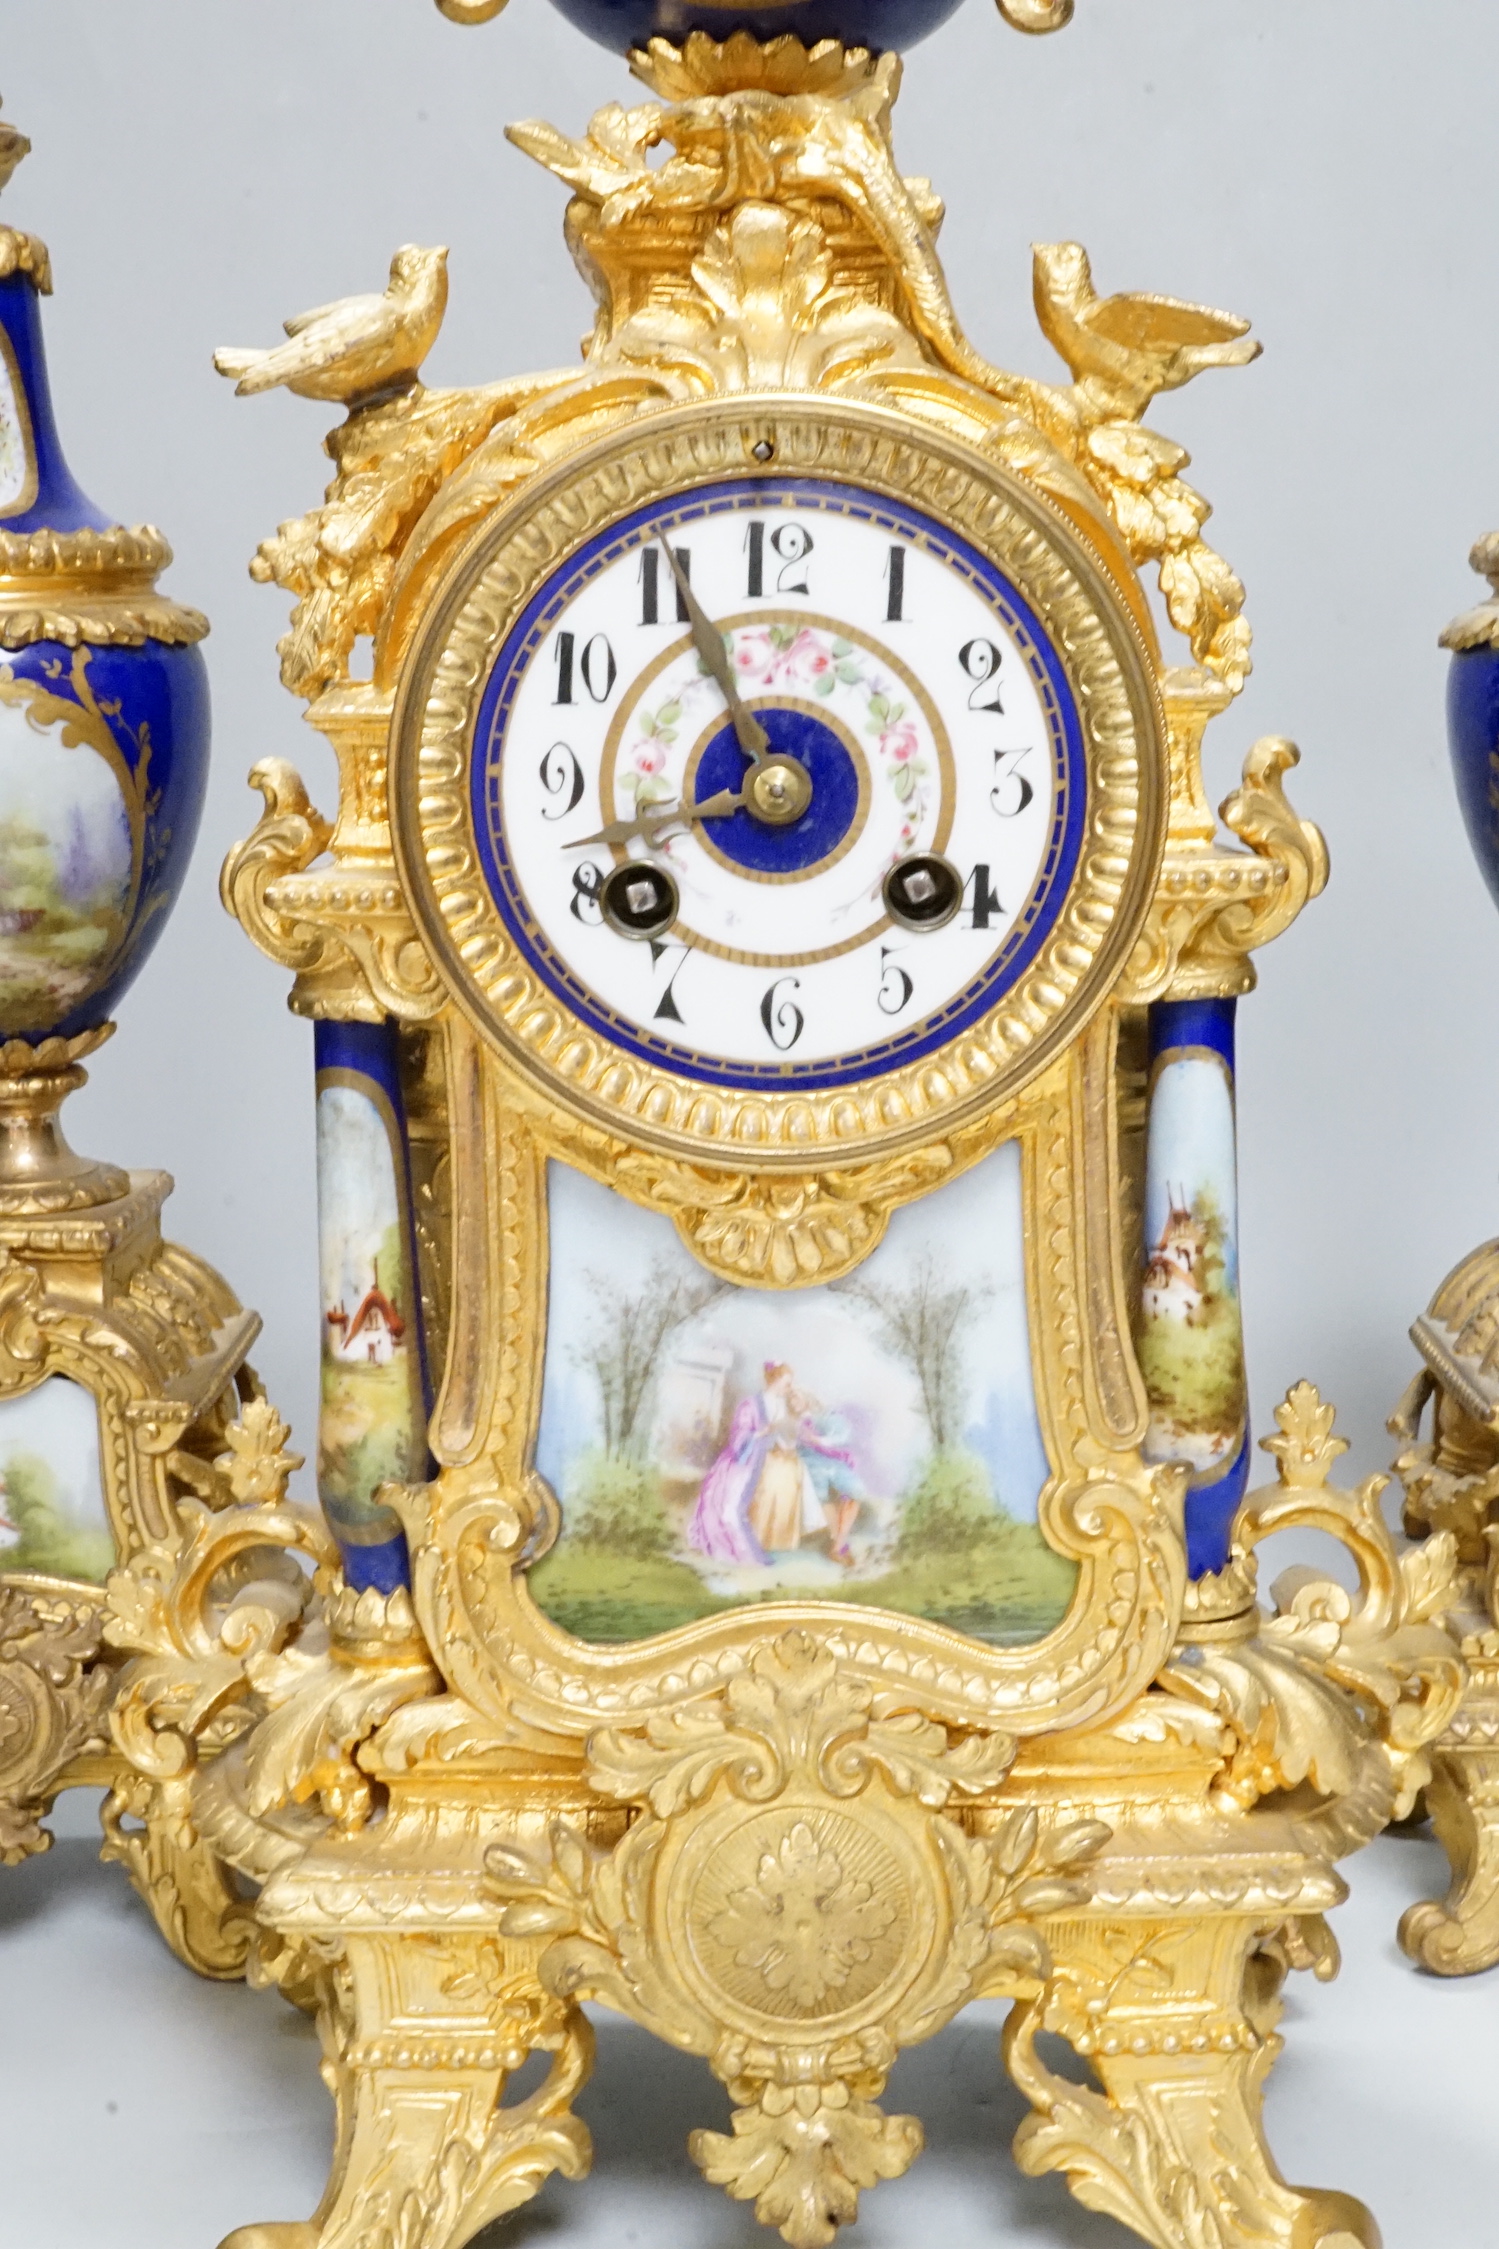 An early 20th century French gilt metal and porcelain set clock garniture, 42cm